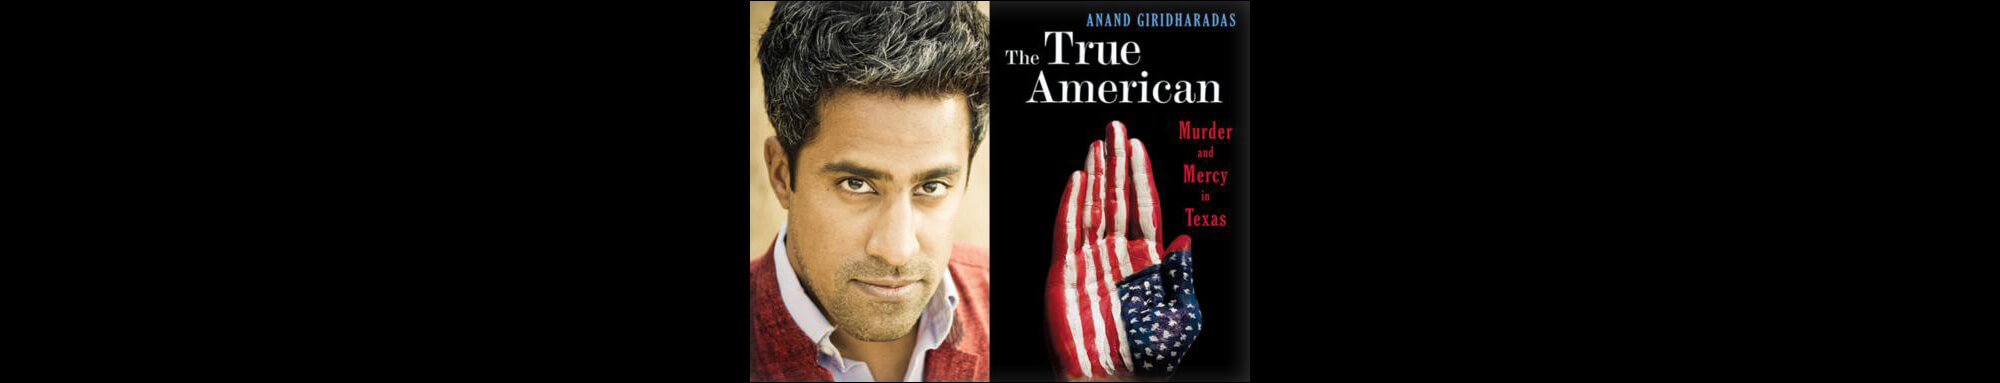 Anand Giridharadas, author of 'The True American,' will visit West Michigan in March for presentations about the book.